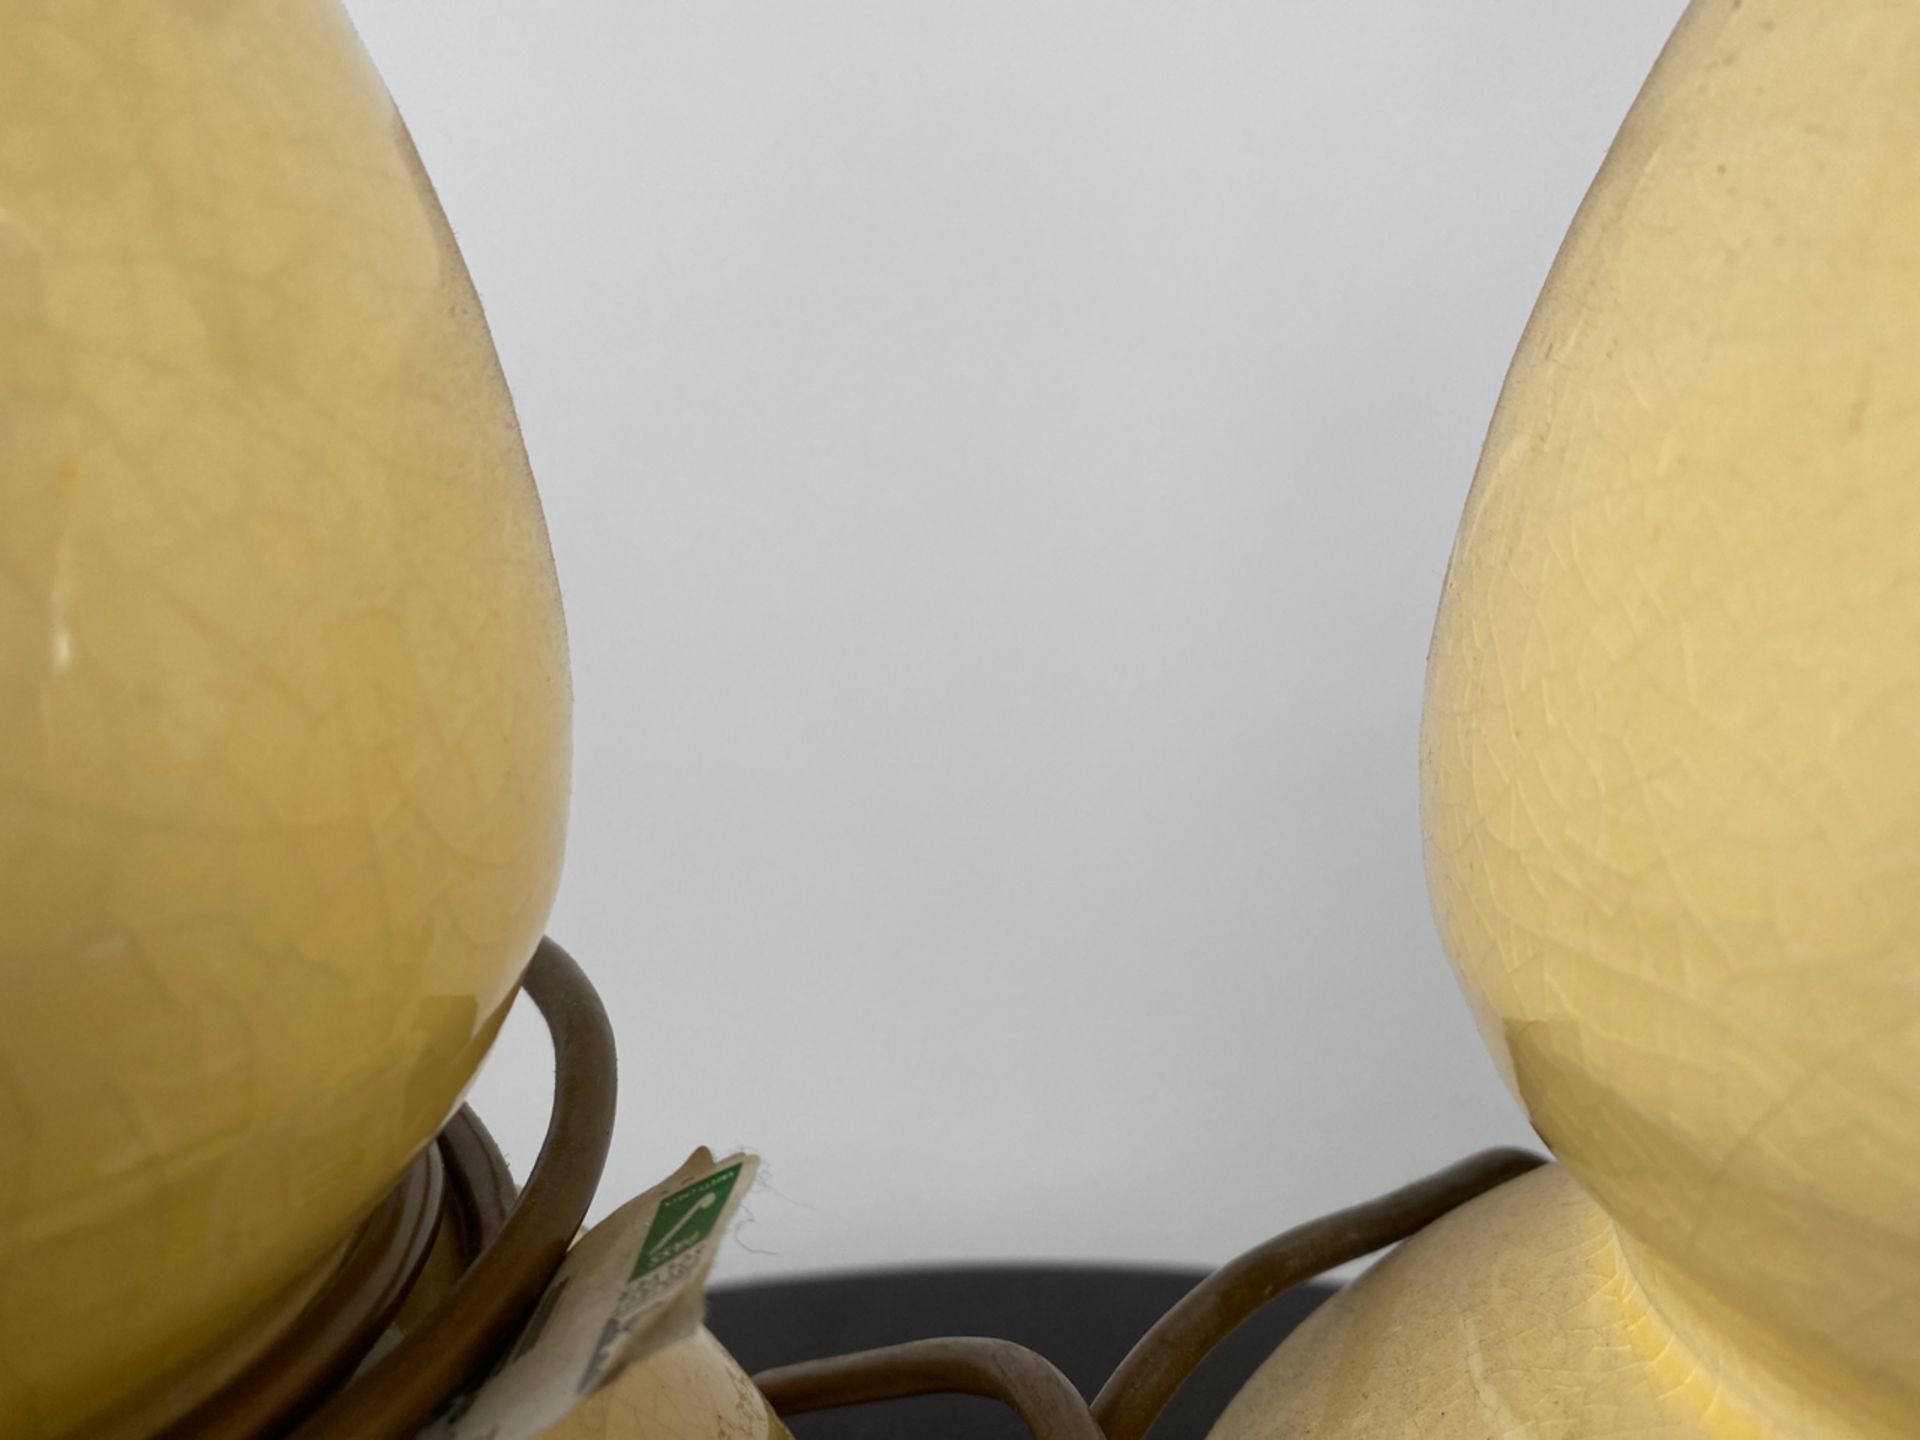 Pair of Pale Yellow Ceramic Table Lamps - Image 3 of 3